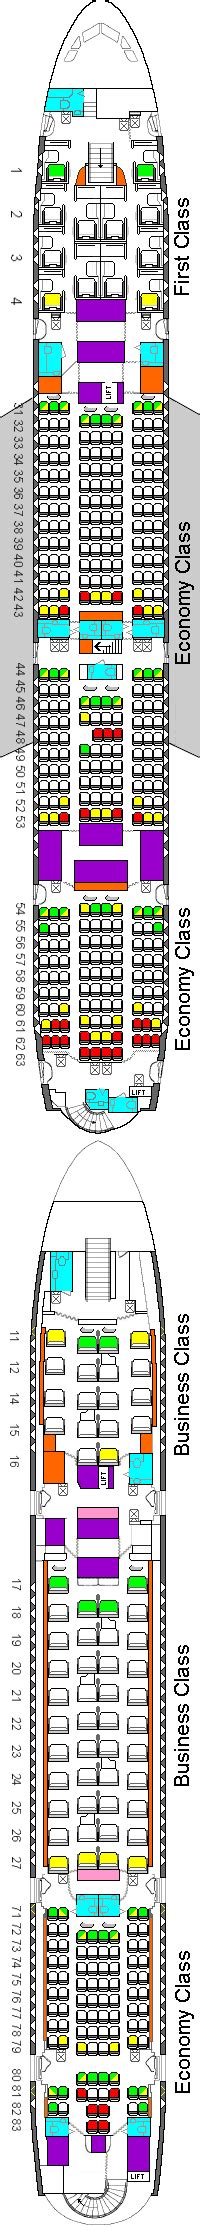 Singapore Airlines A380 Seating Plan SQ Seat Pictures Floor Plan